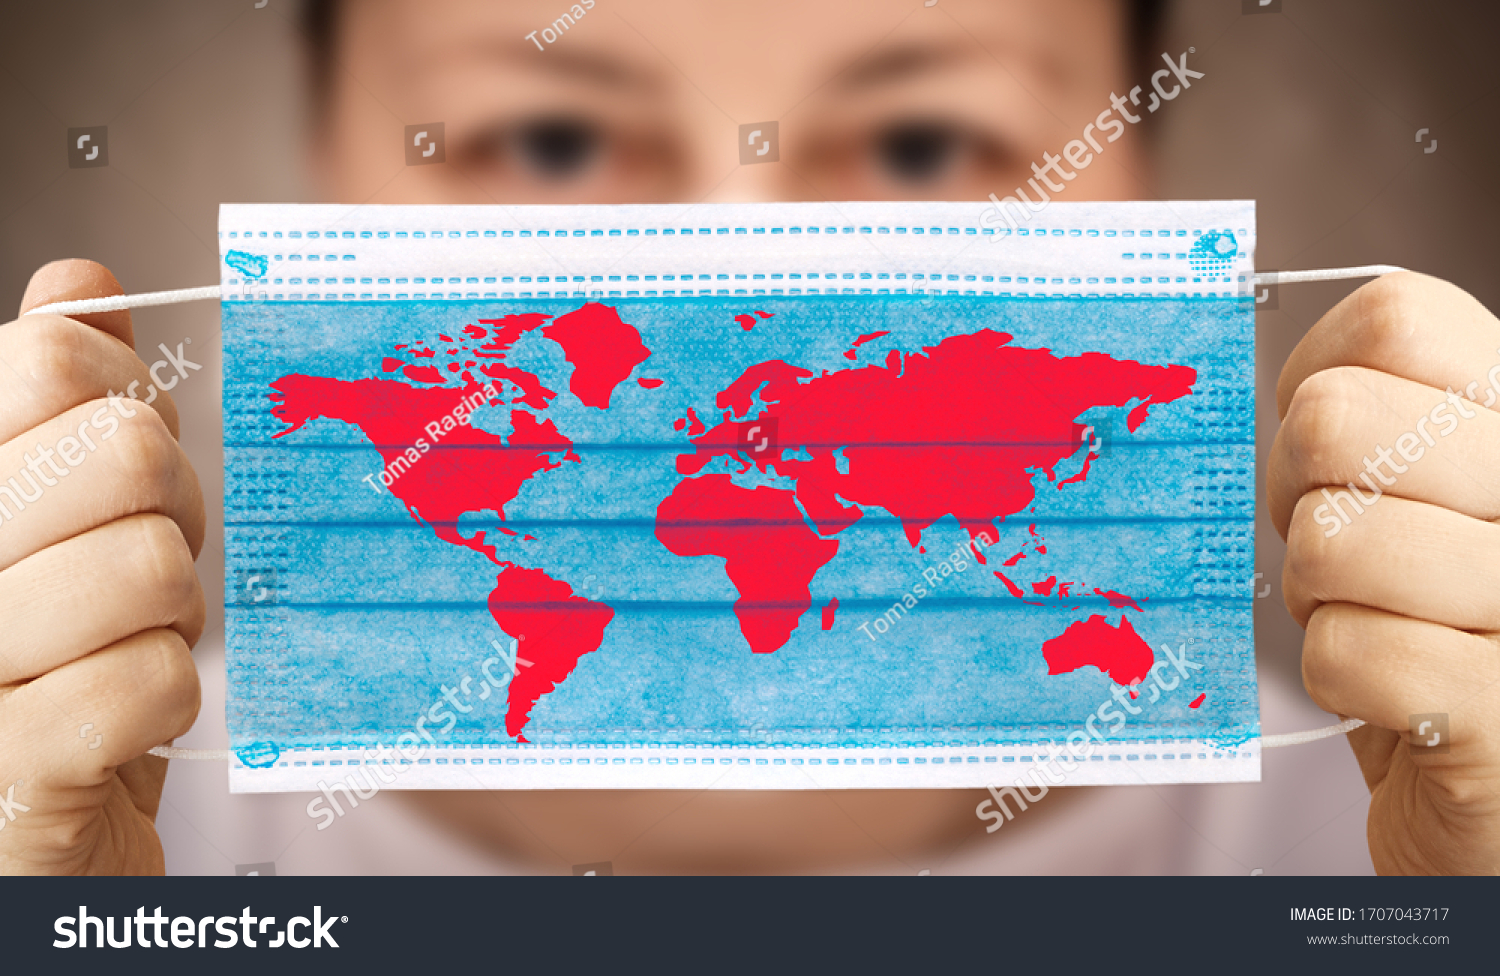 Face mask in hand with world map. Covid-19 outbreak around the world. The global economic crisis. Crash by coronavirus. Life in lockdown around the world #1707043717